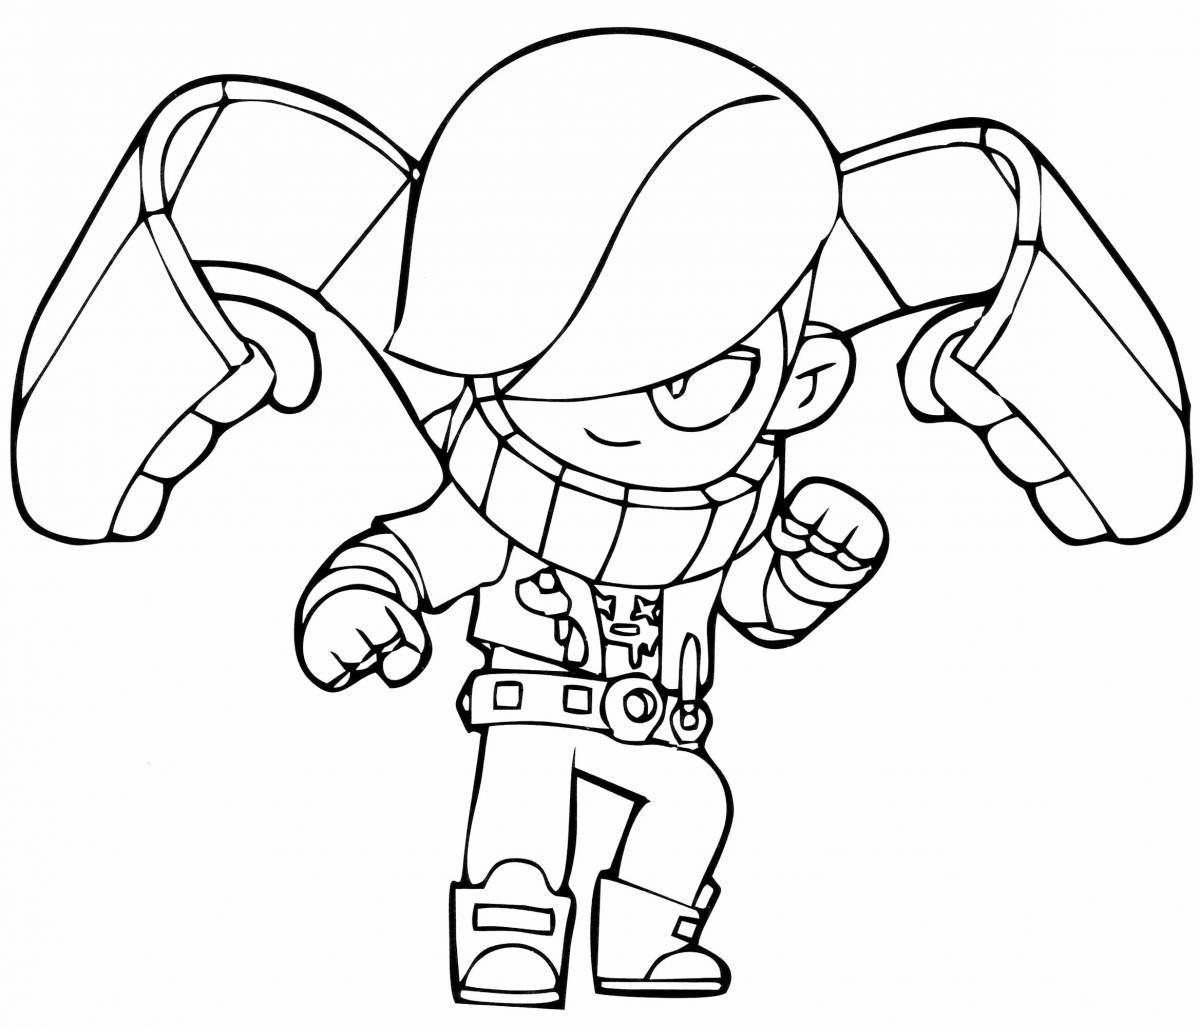 Manly brawl stars coloring book characters